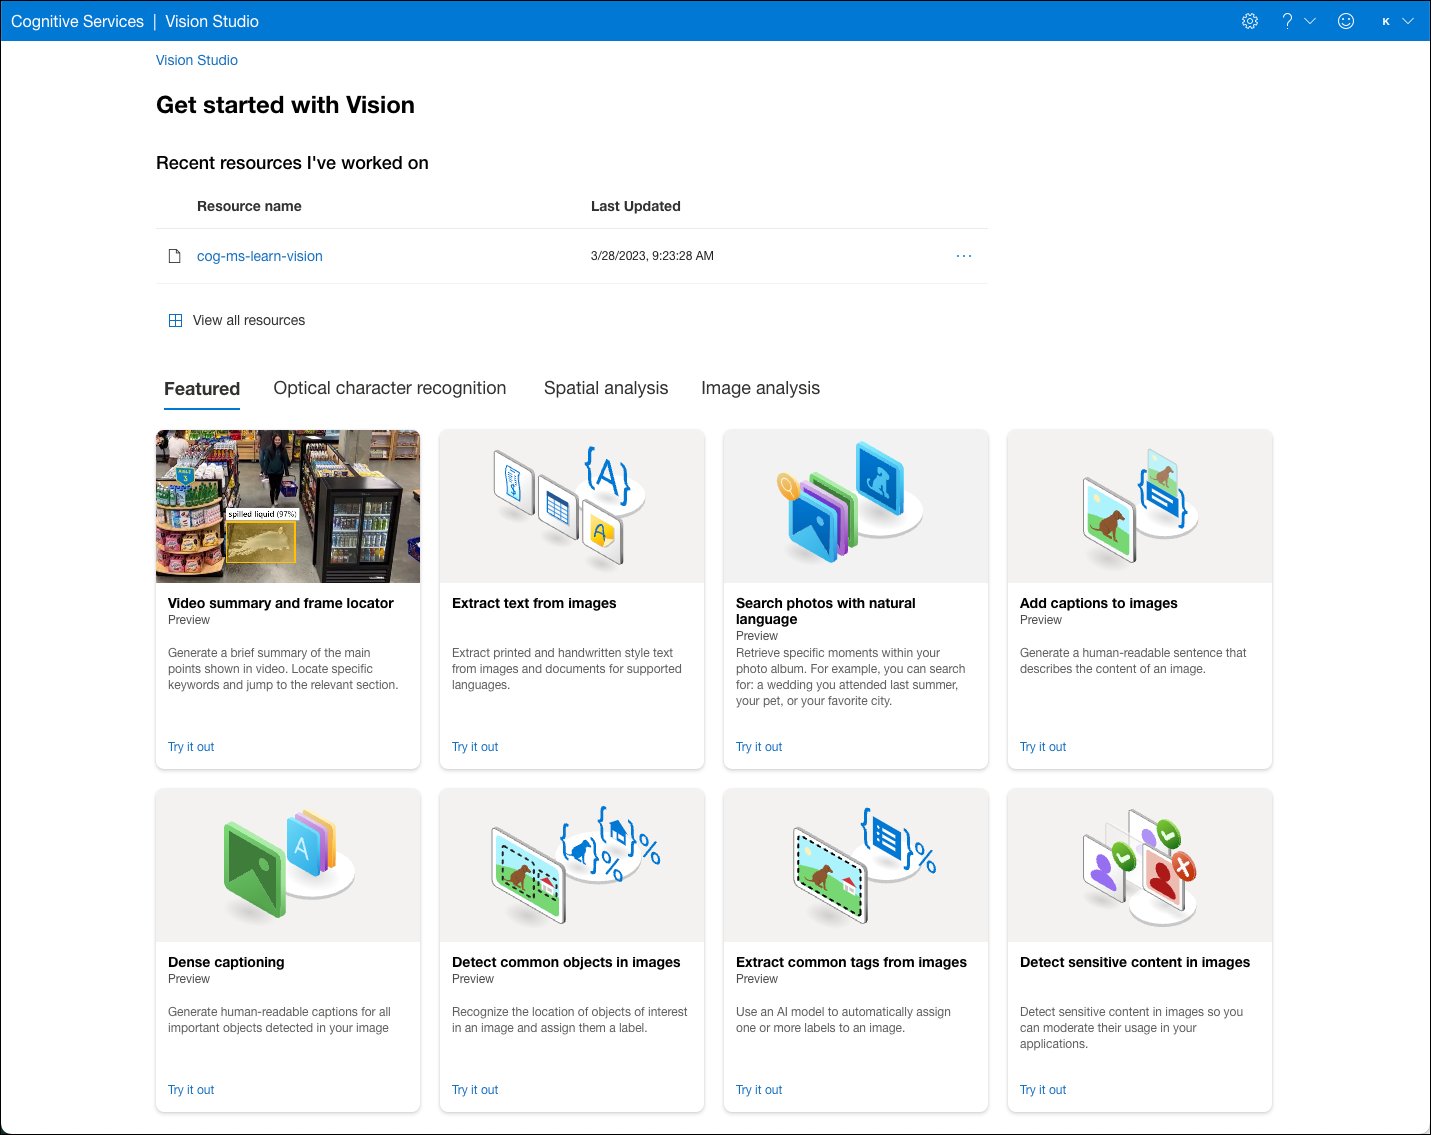 Screenshot of the Get started with Vision page of Vision Studio, with the tiles of featured capabilities selected.